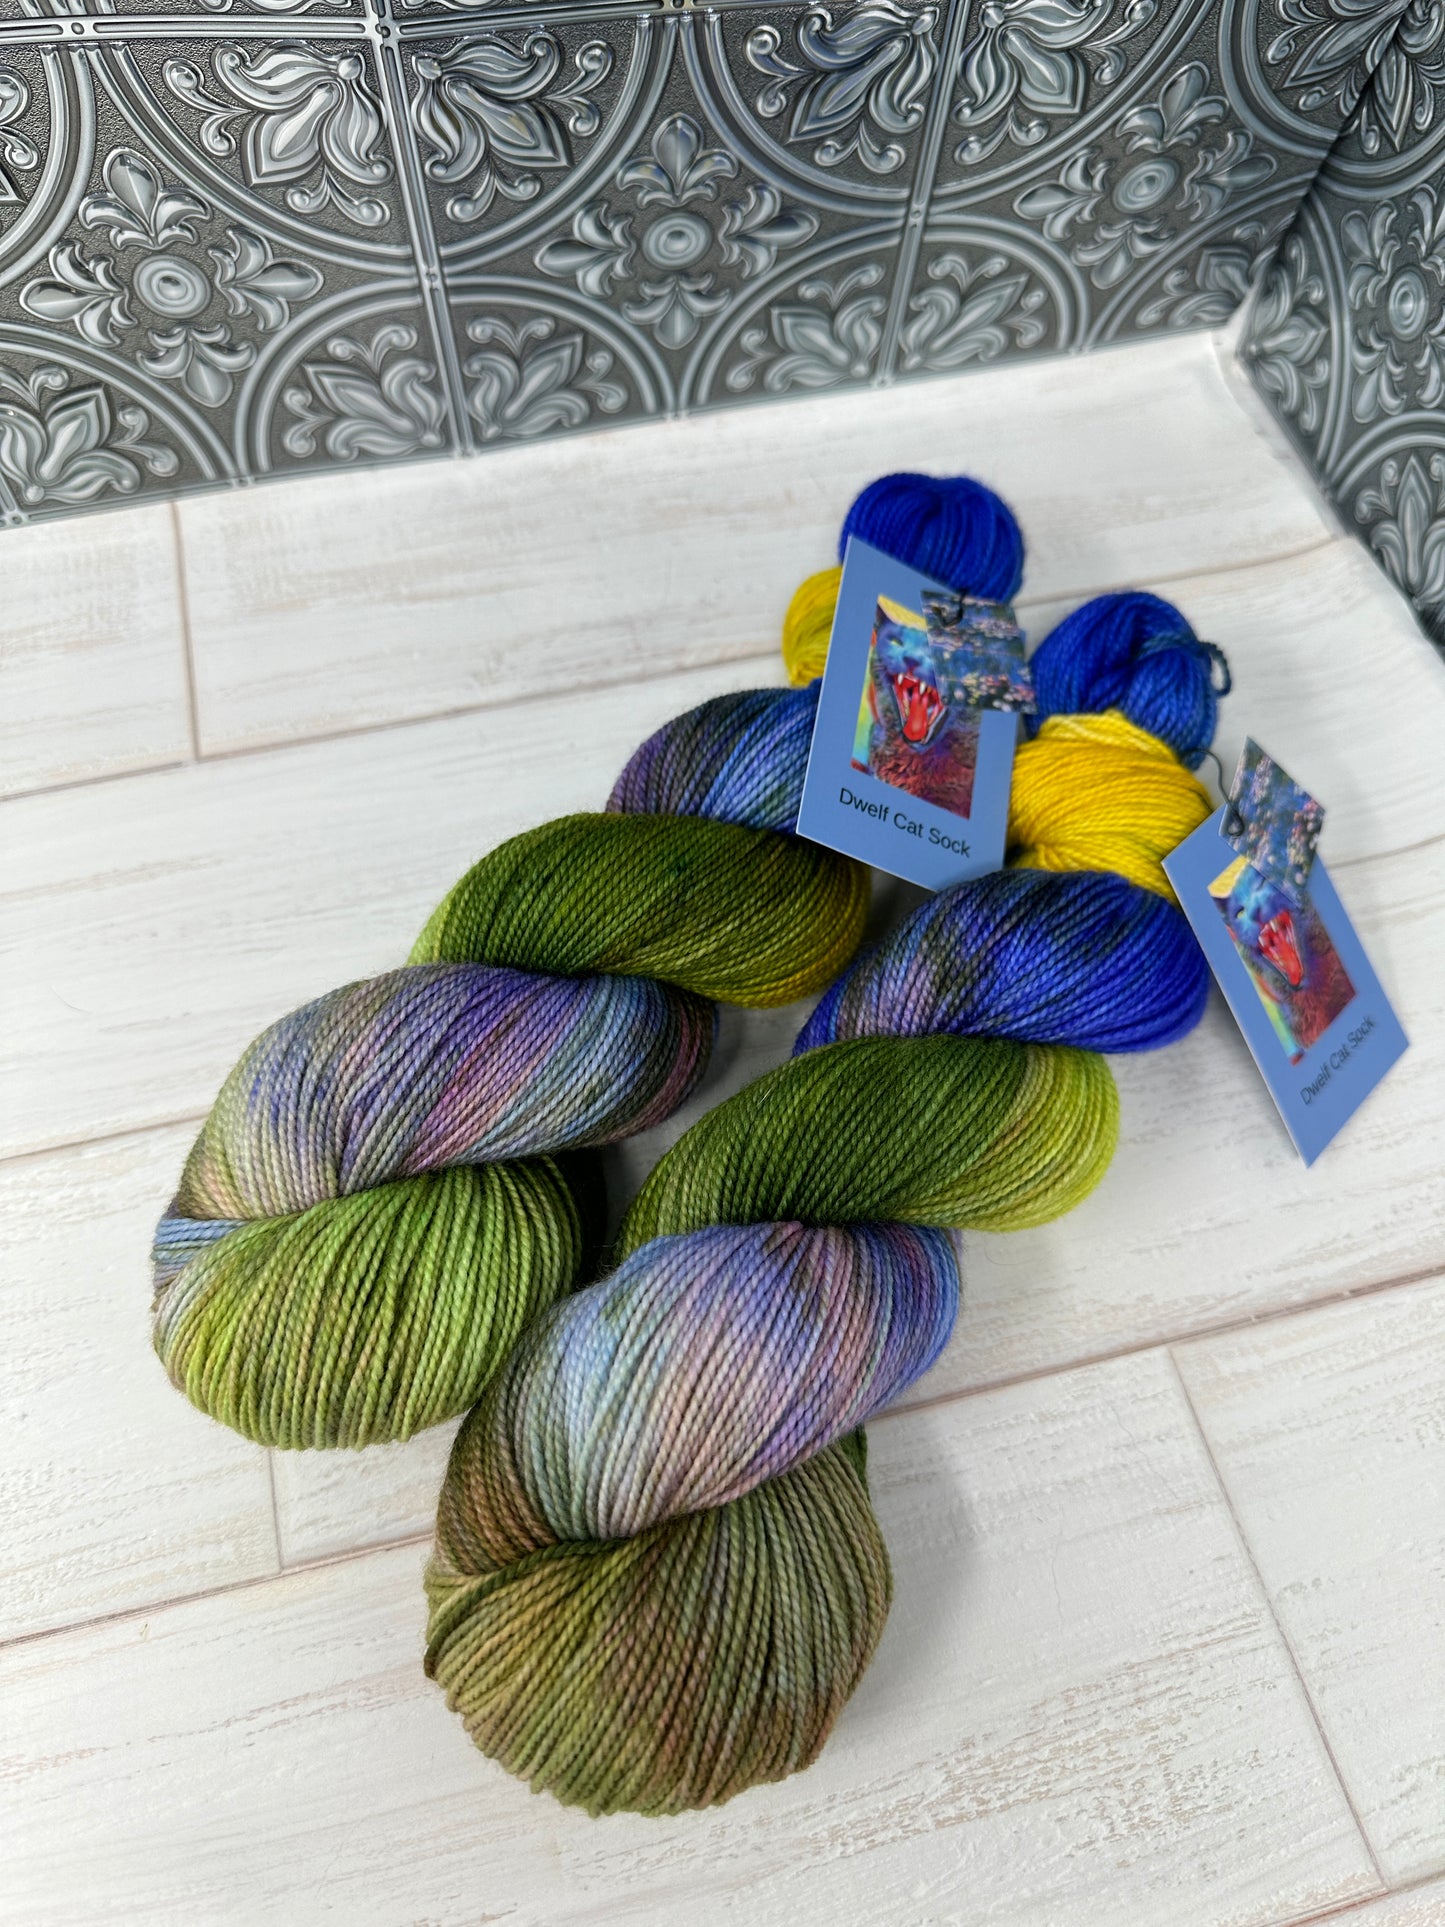 "Water Lilies 1916" on Various Yarn Bases